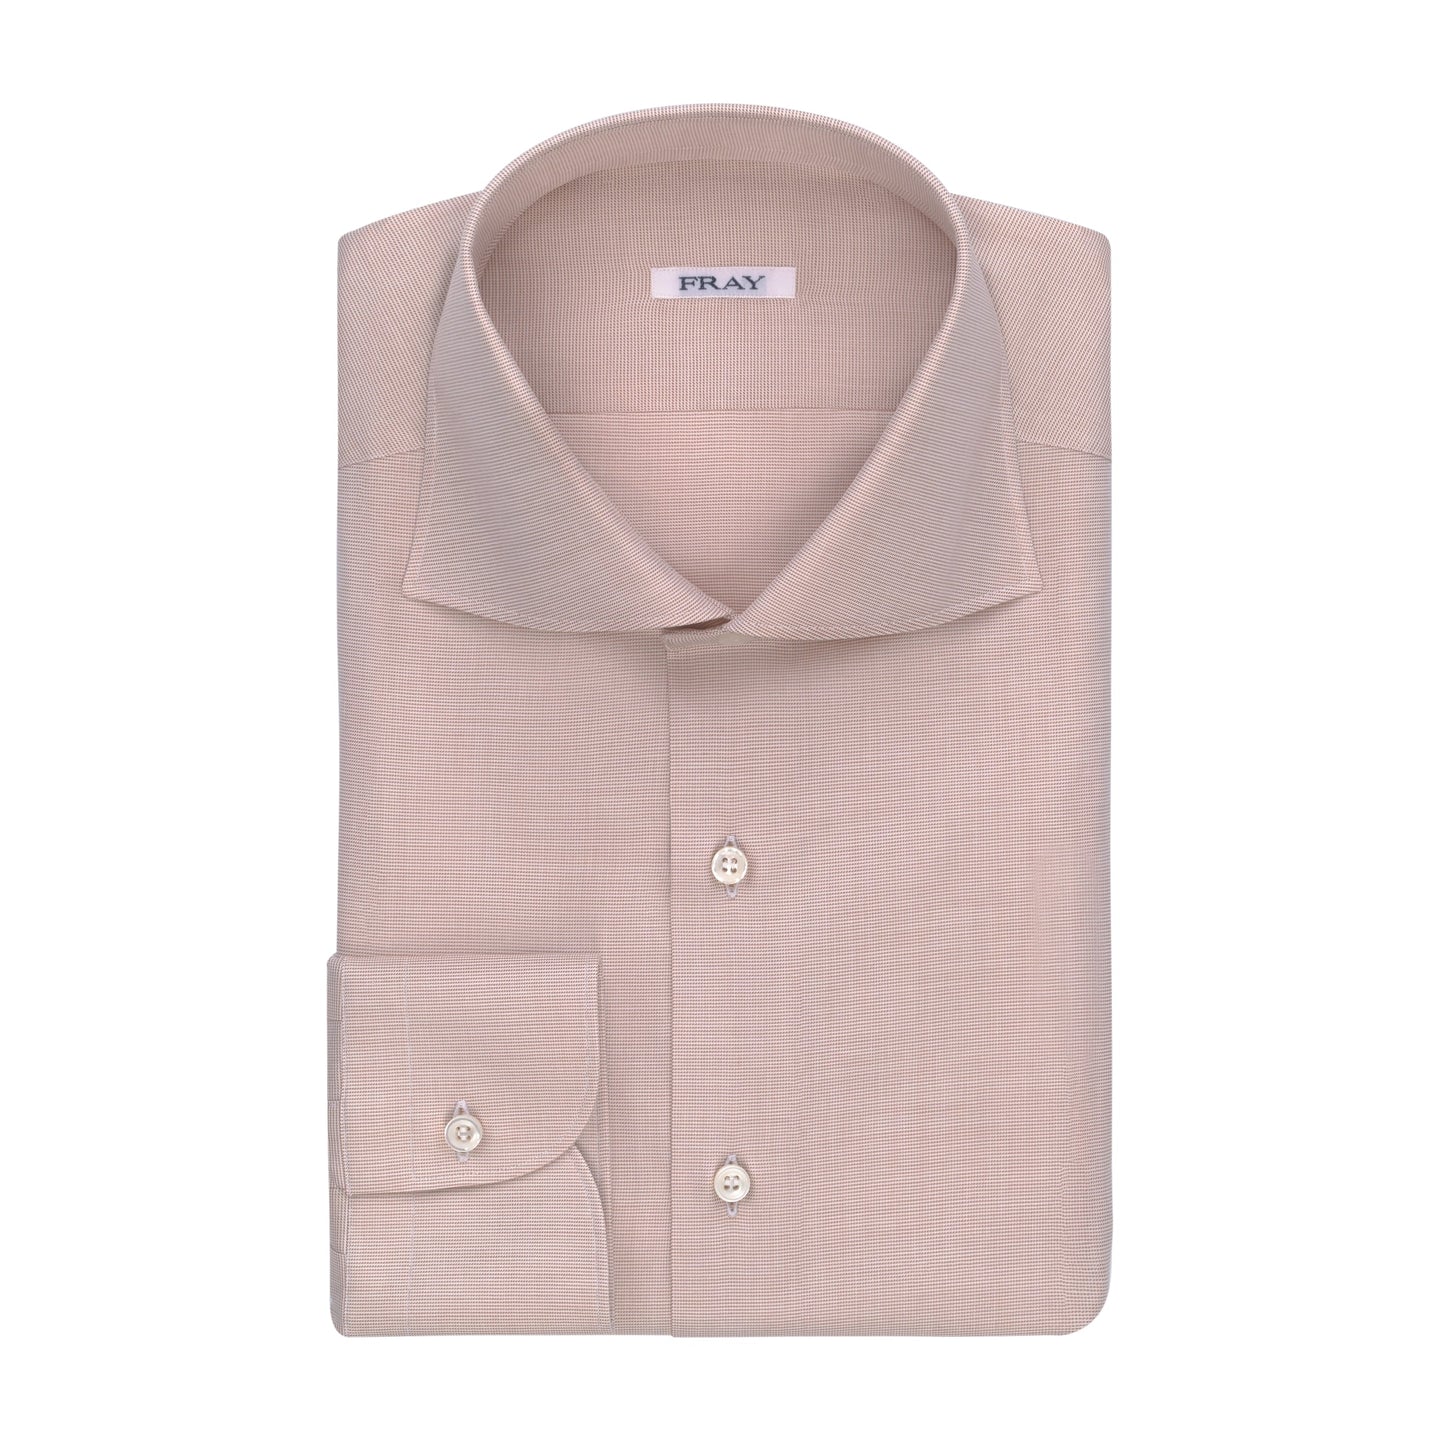 Fray Pinpoint Cotton Shirt in White and Light Brown - SARTALE